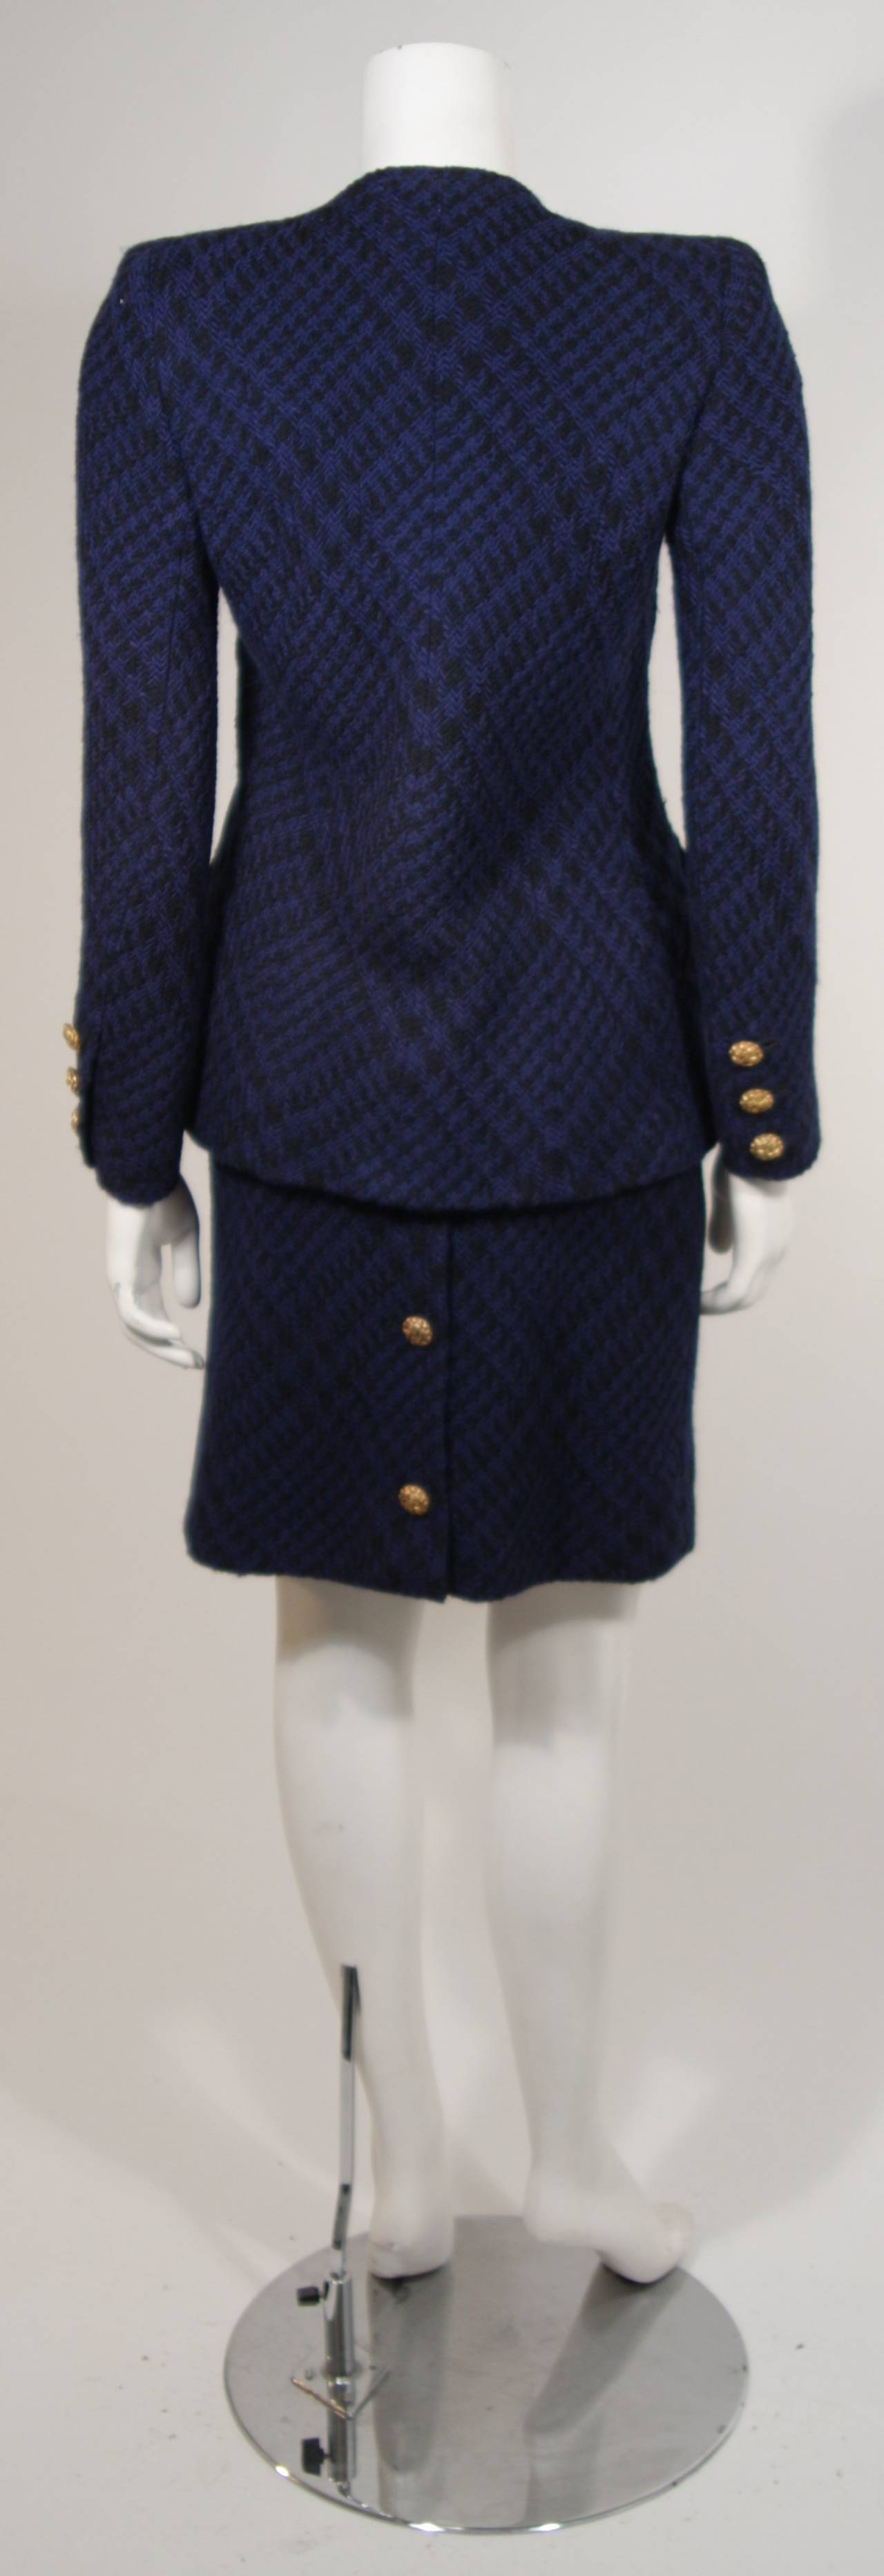 1980's Chanel Haute Couture Blue and Black Tweed Skirt Suit Size 4 2